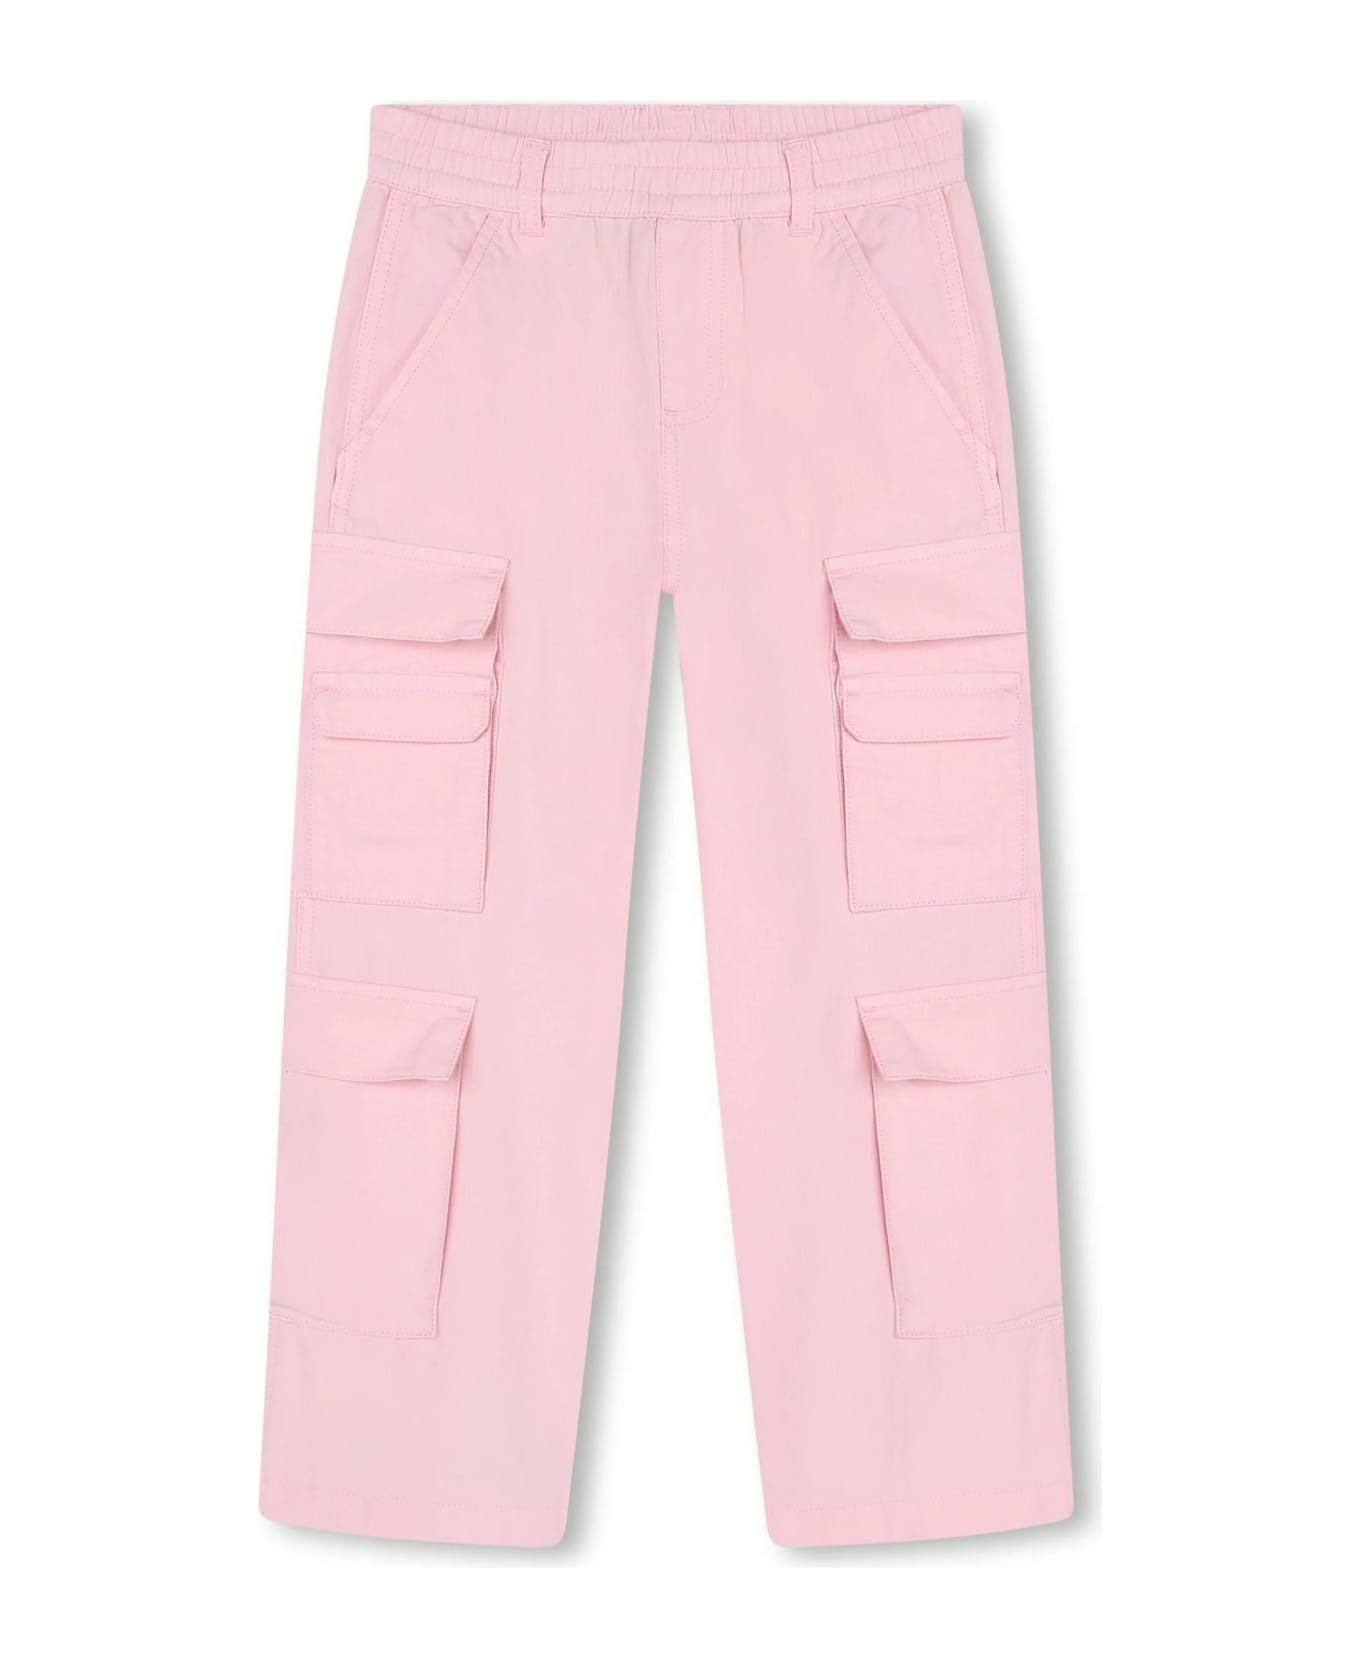 Marc Jacobs Trousers Pink - Pink ボトムス